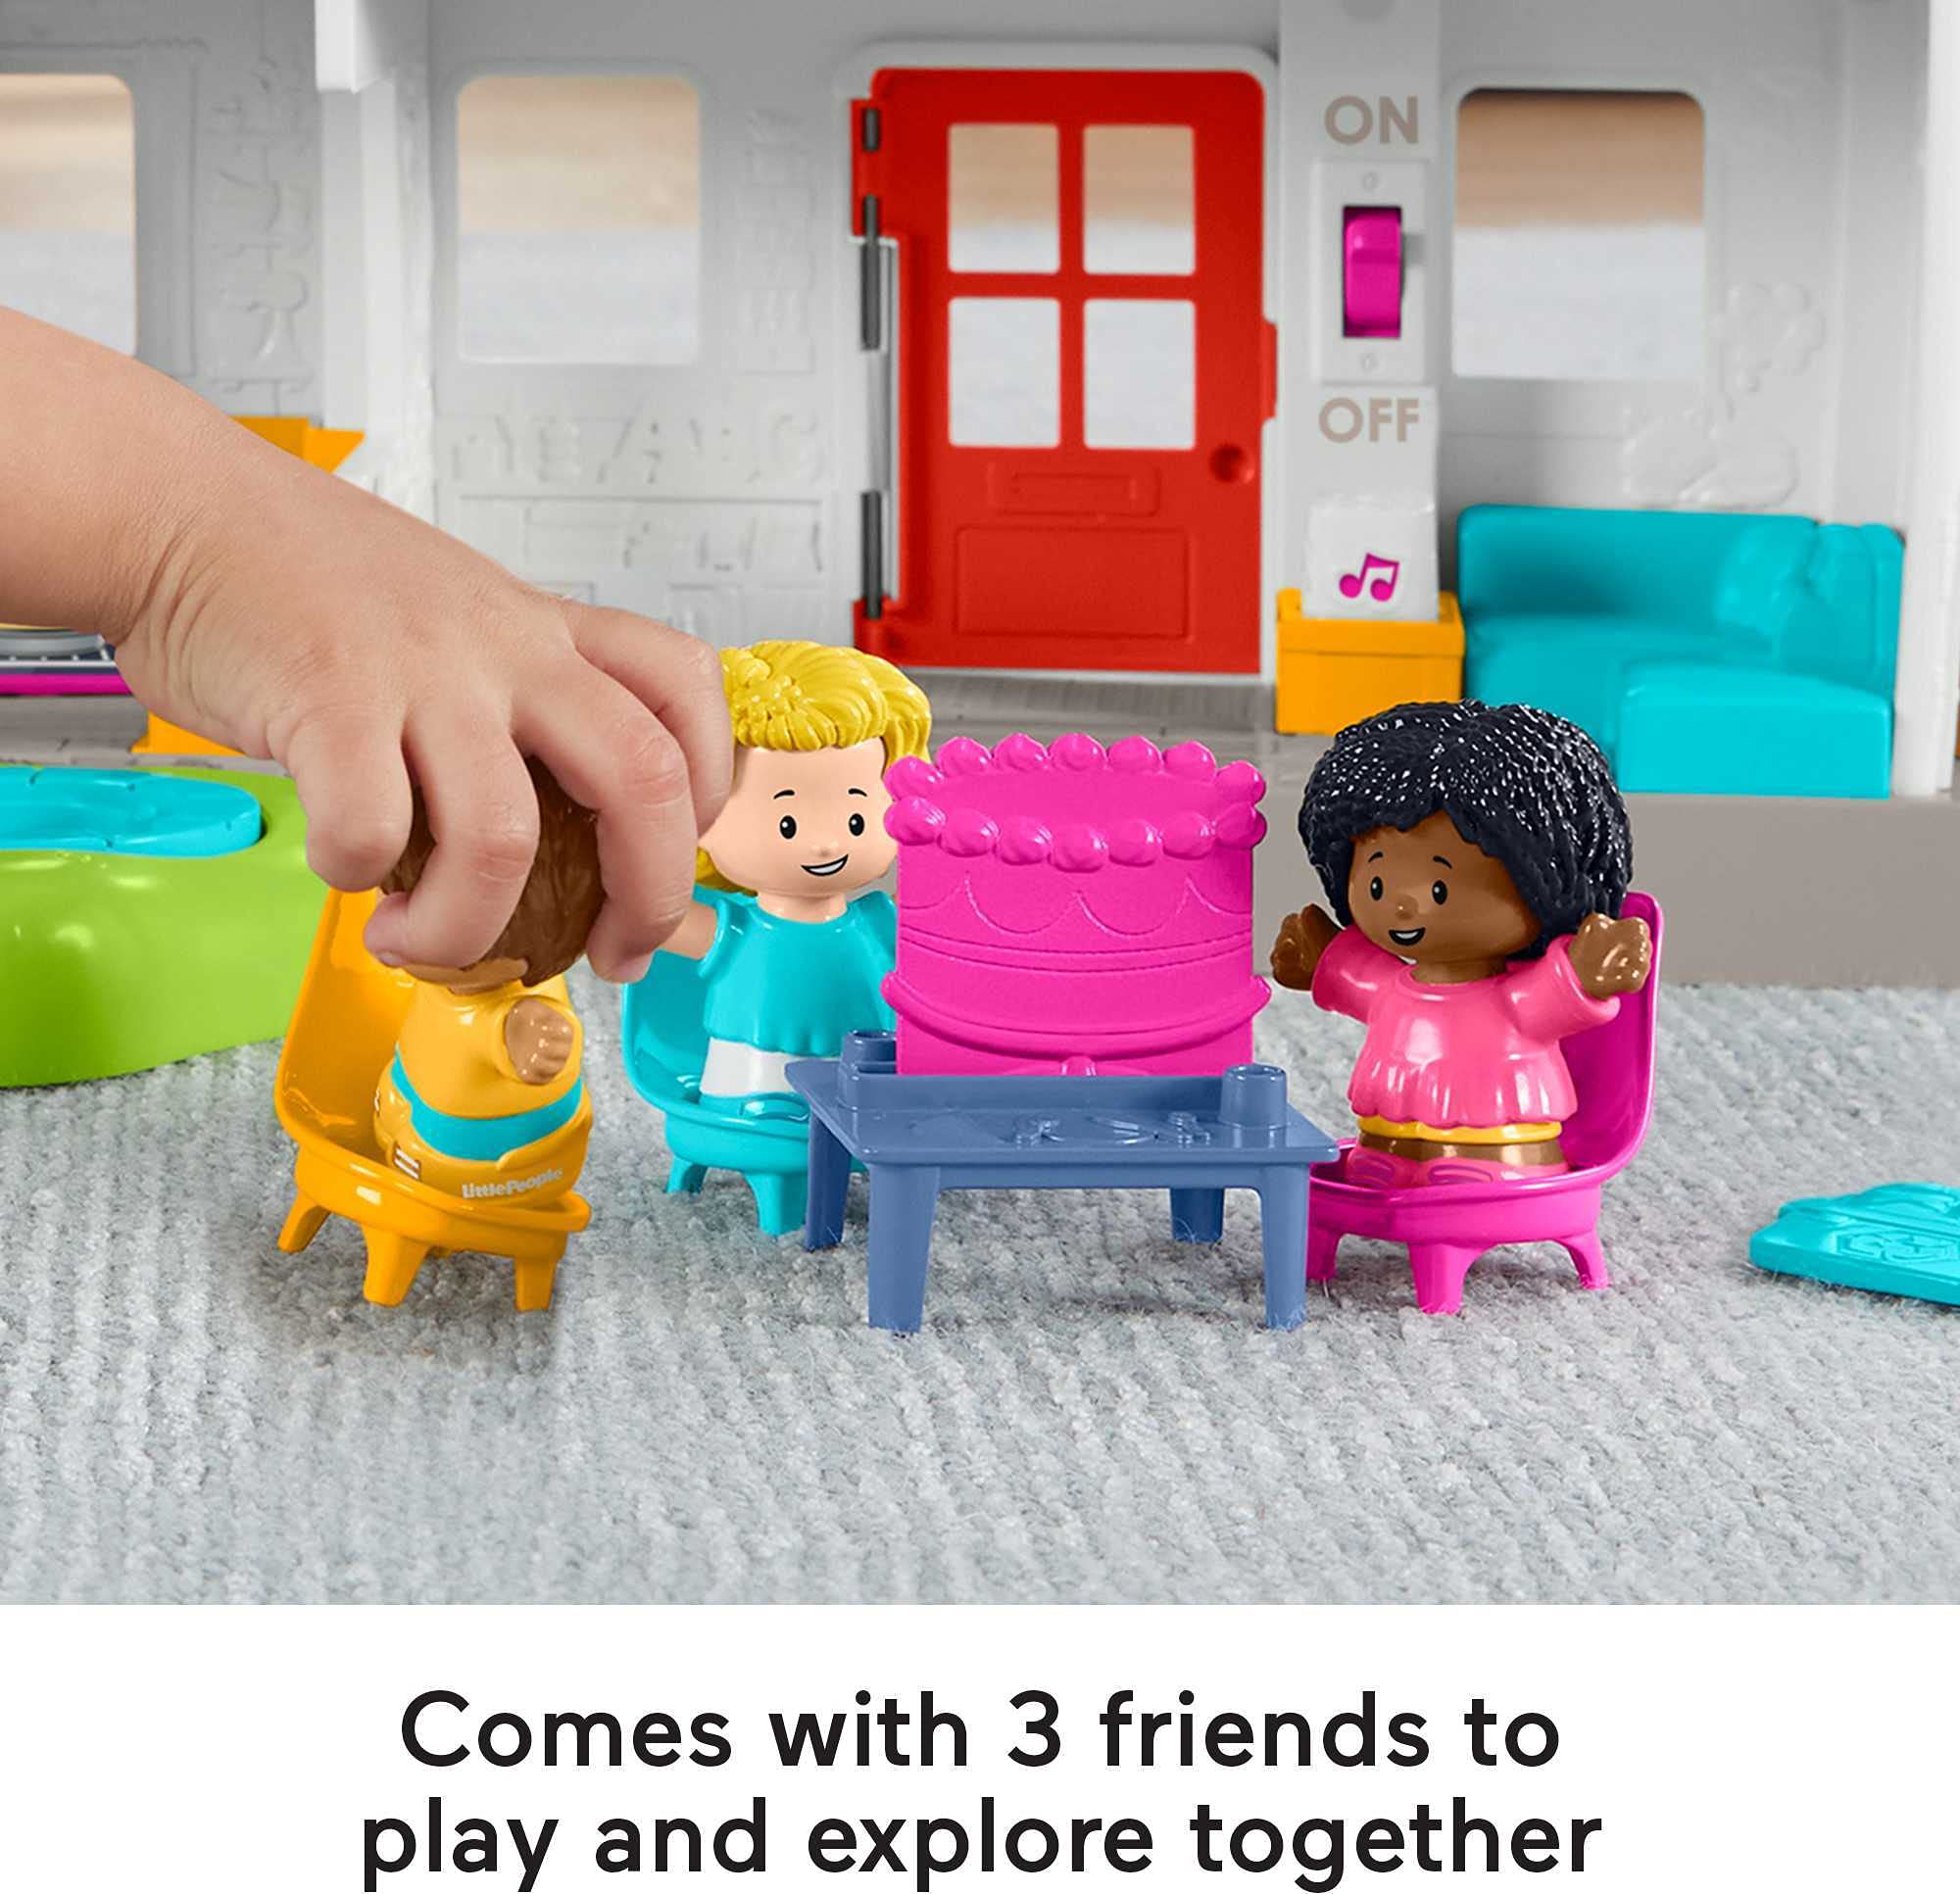 Fisher-Price Little People Toddler Playset Friends Together Play House Interactive Learning Toy With Smart Stages For Ages 1+ Years